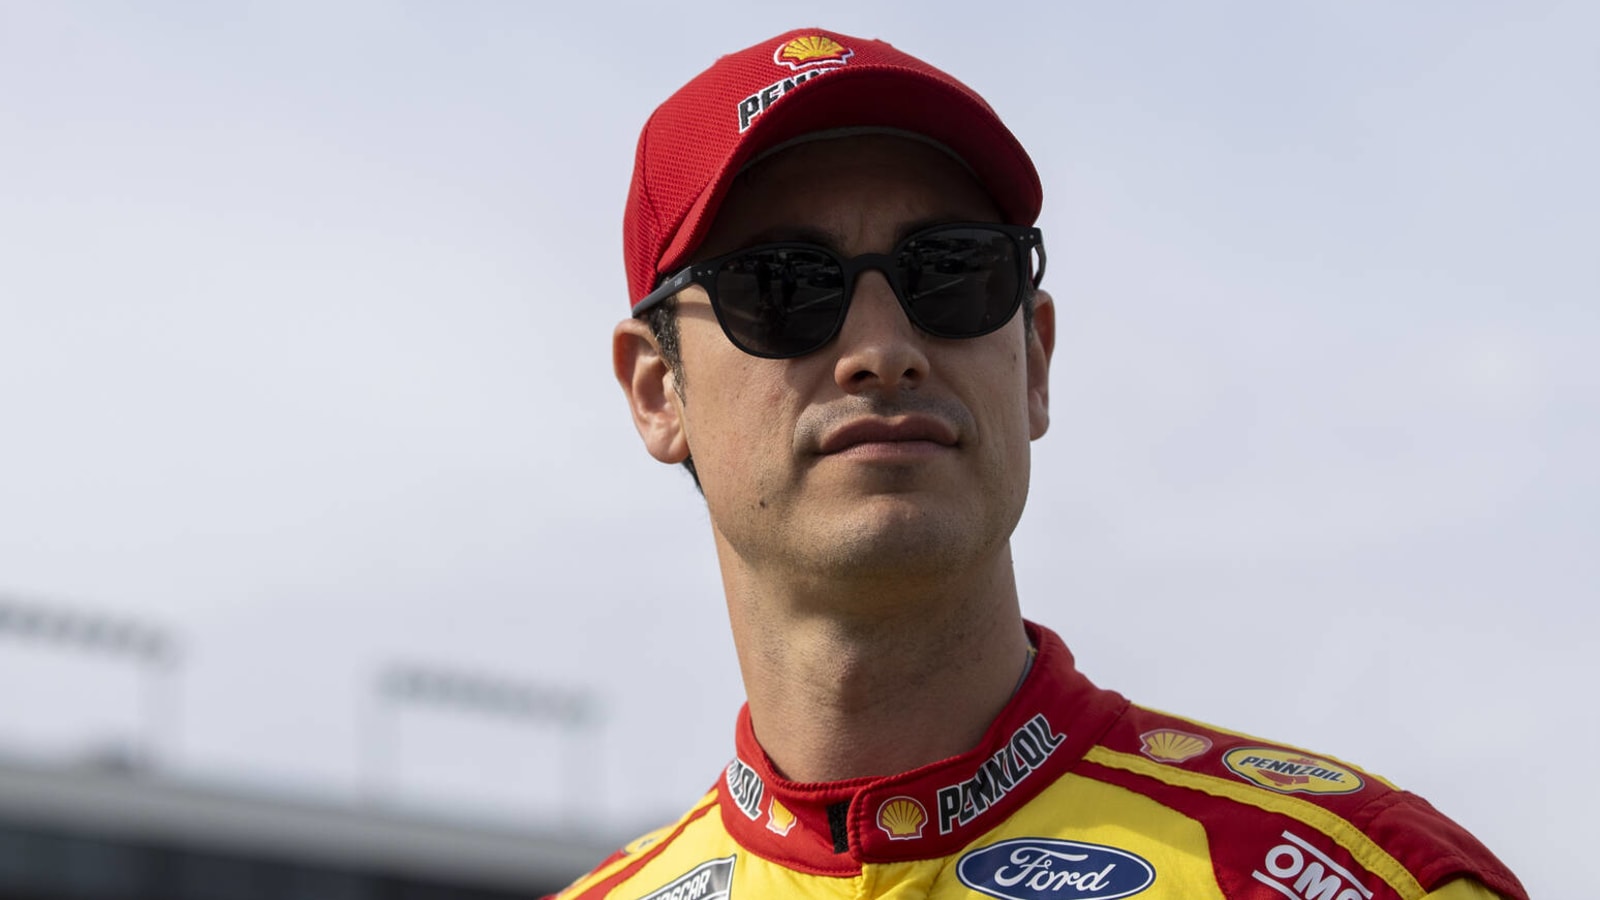 Logano's second-place finish could be the turning point of season